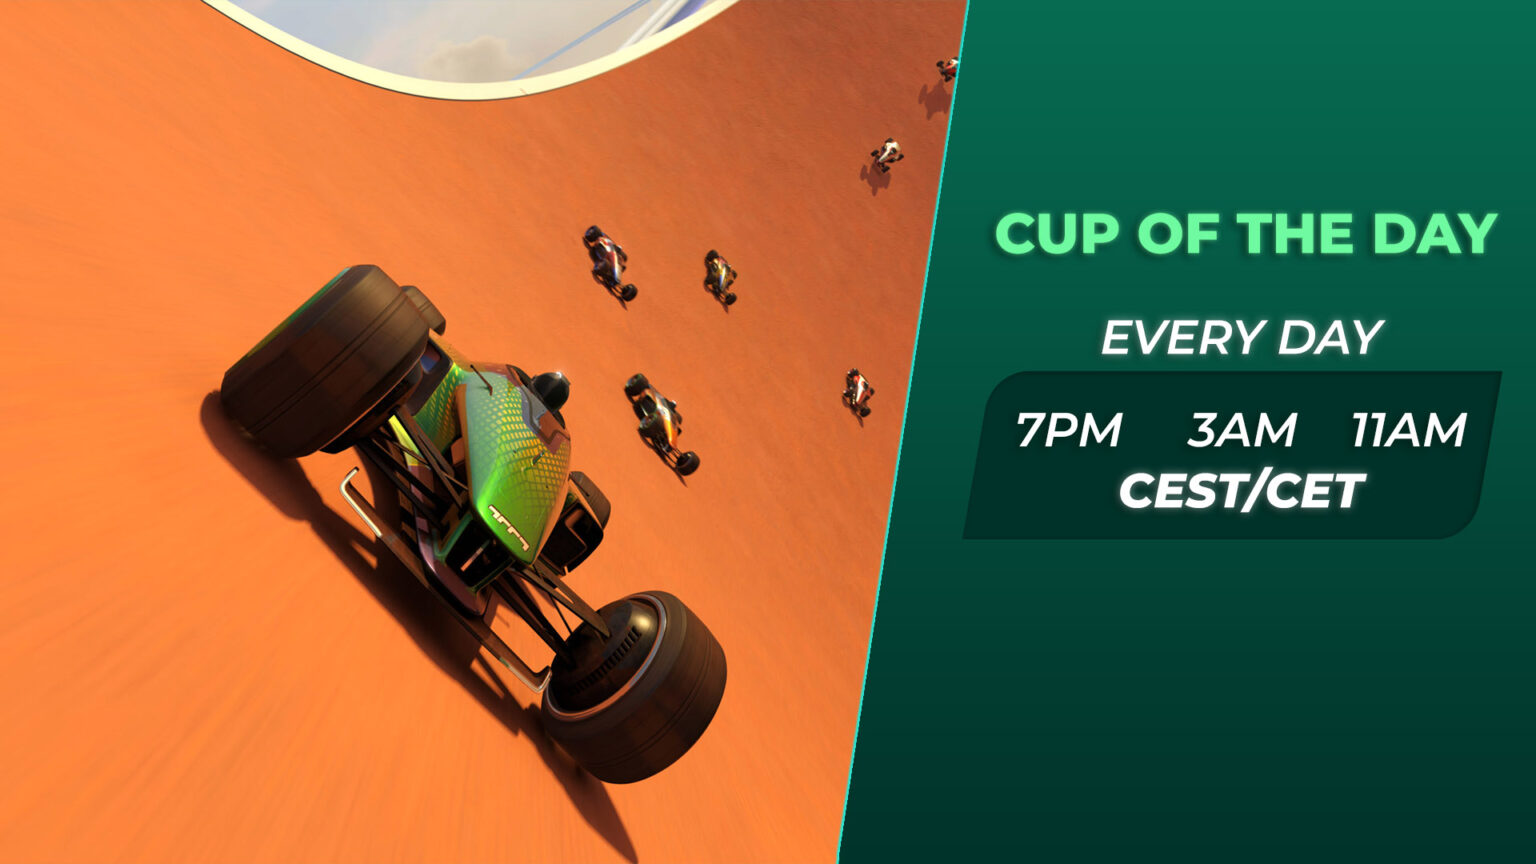 cup-of-the-day-is-now-available-three-times-a-day-trackmania-the